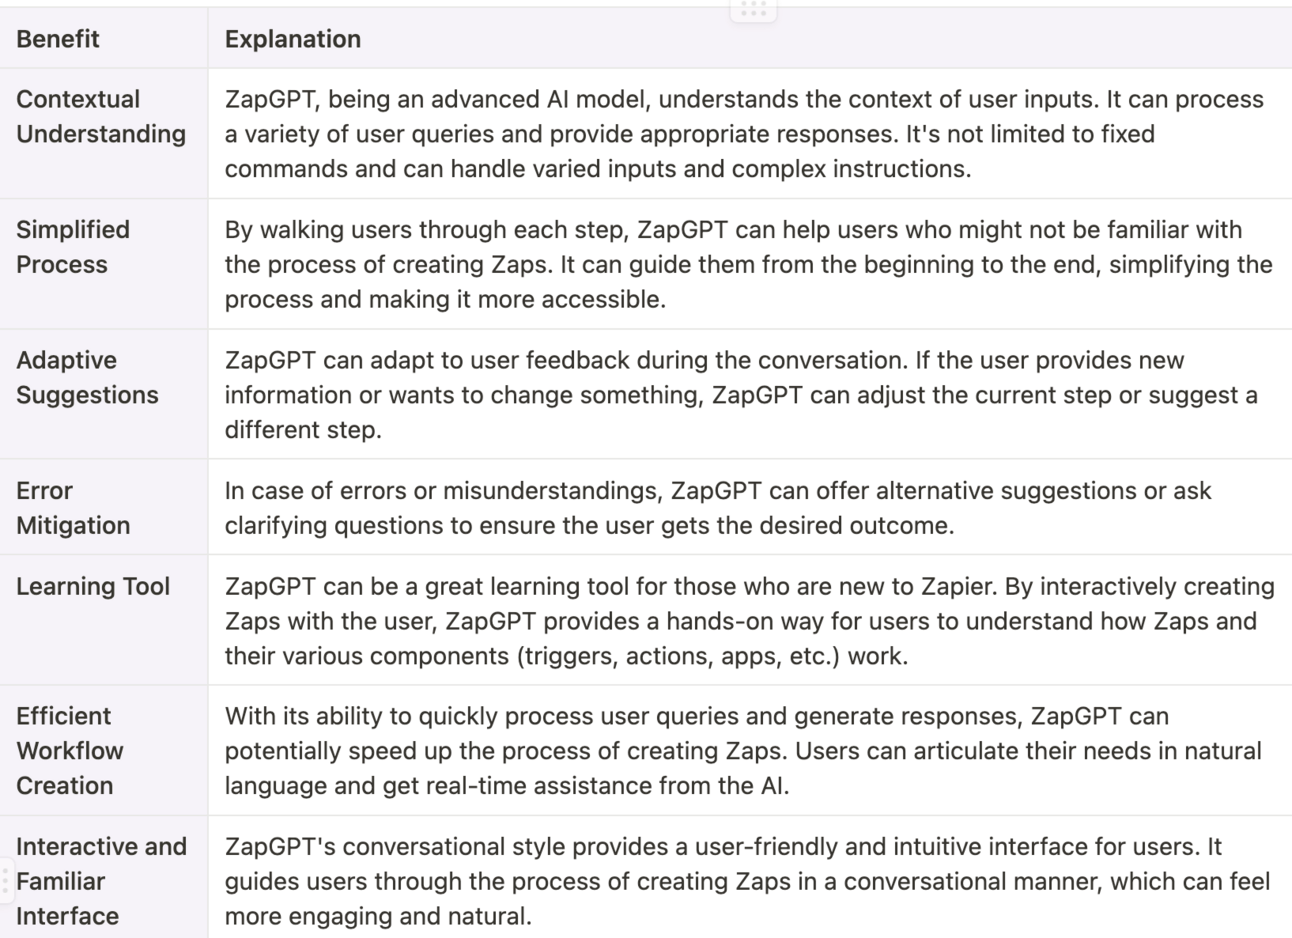 A table summarizing the main benefits of ZapGPT: Contextual Understanding, Simplified Process, Adaptive Suggestions, Error Mitigation, Learning Tool, Efficient Workflow Creation, and Interactive and Familiar Interface. Each benefit is accompanied by a detailed explanation, highlighting how ZapGPT enhances the user experience and efficiency in creating Zaps on Zapier.